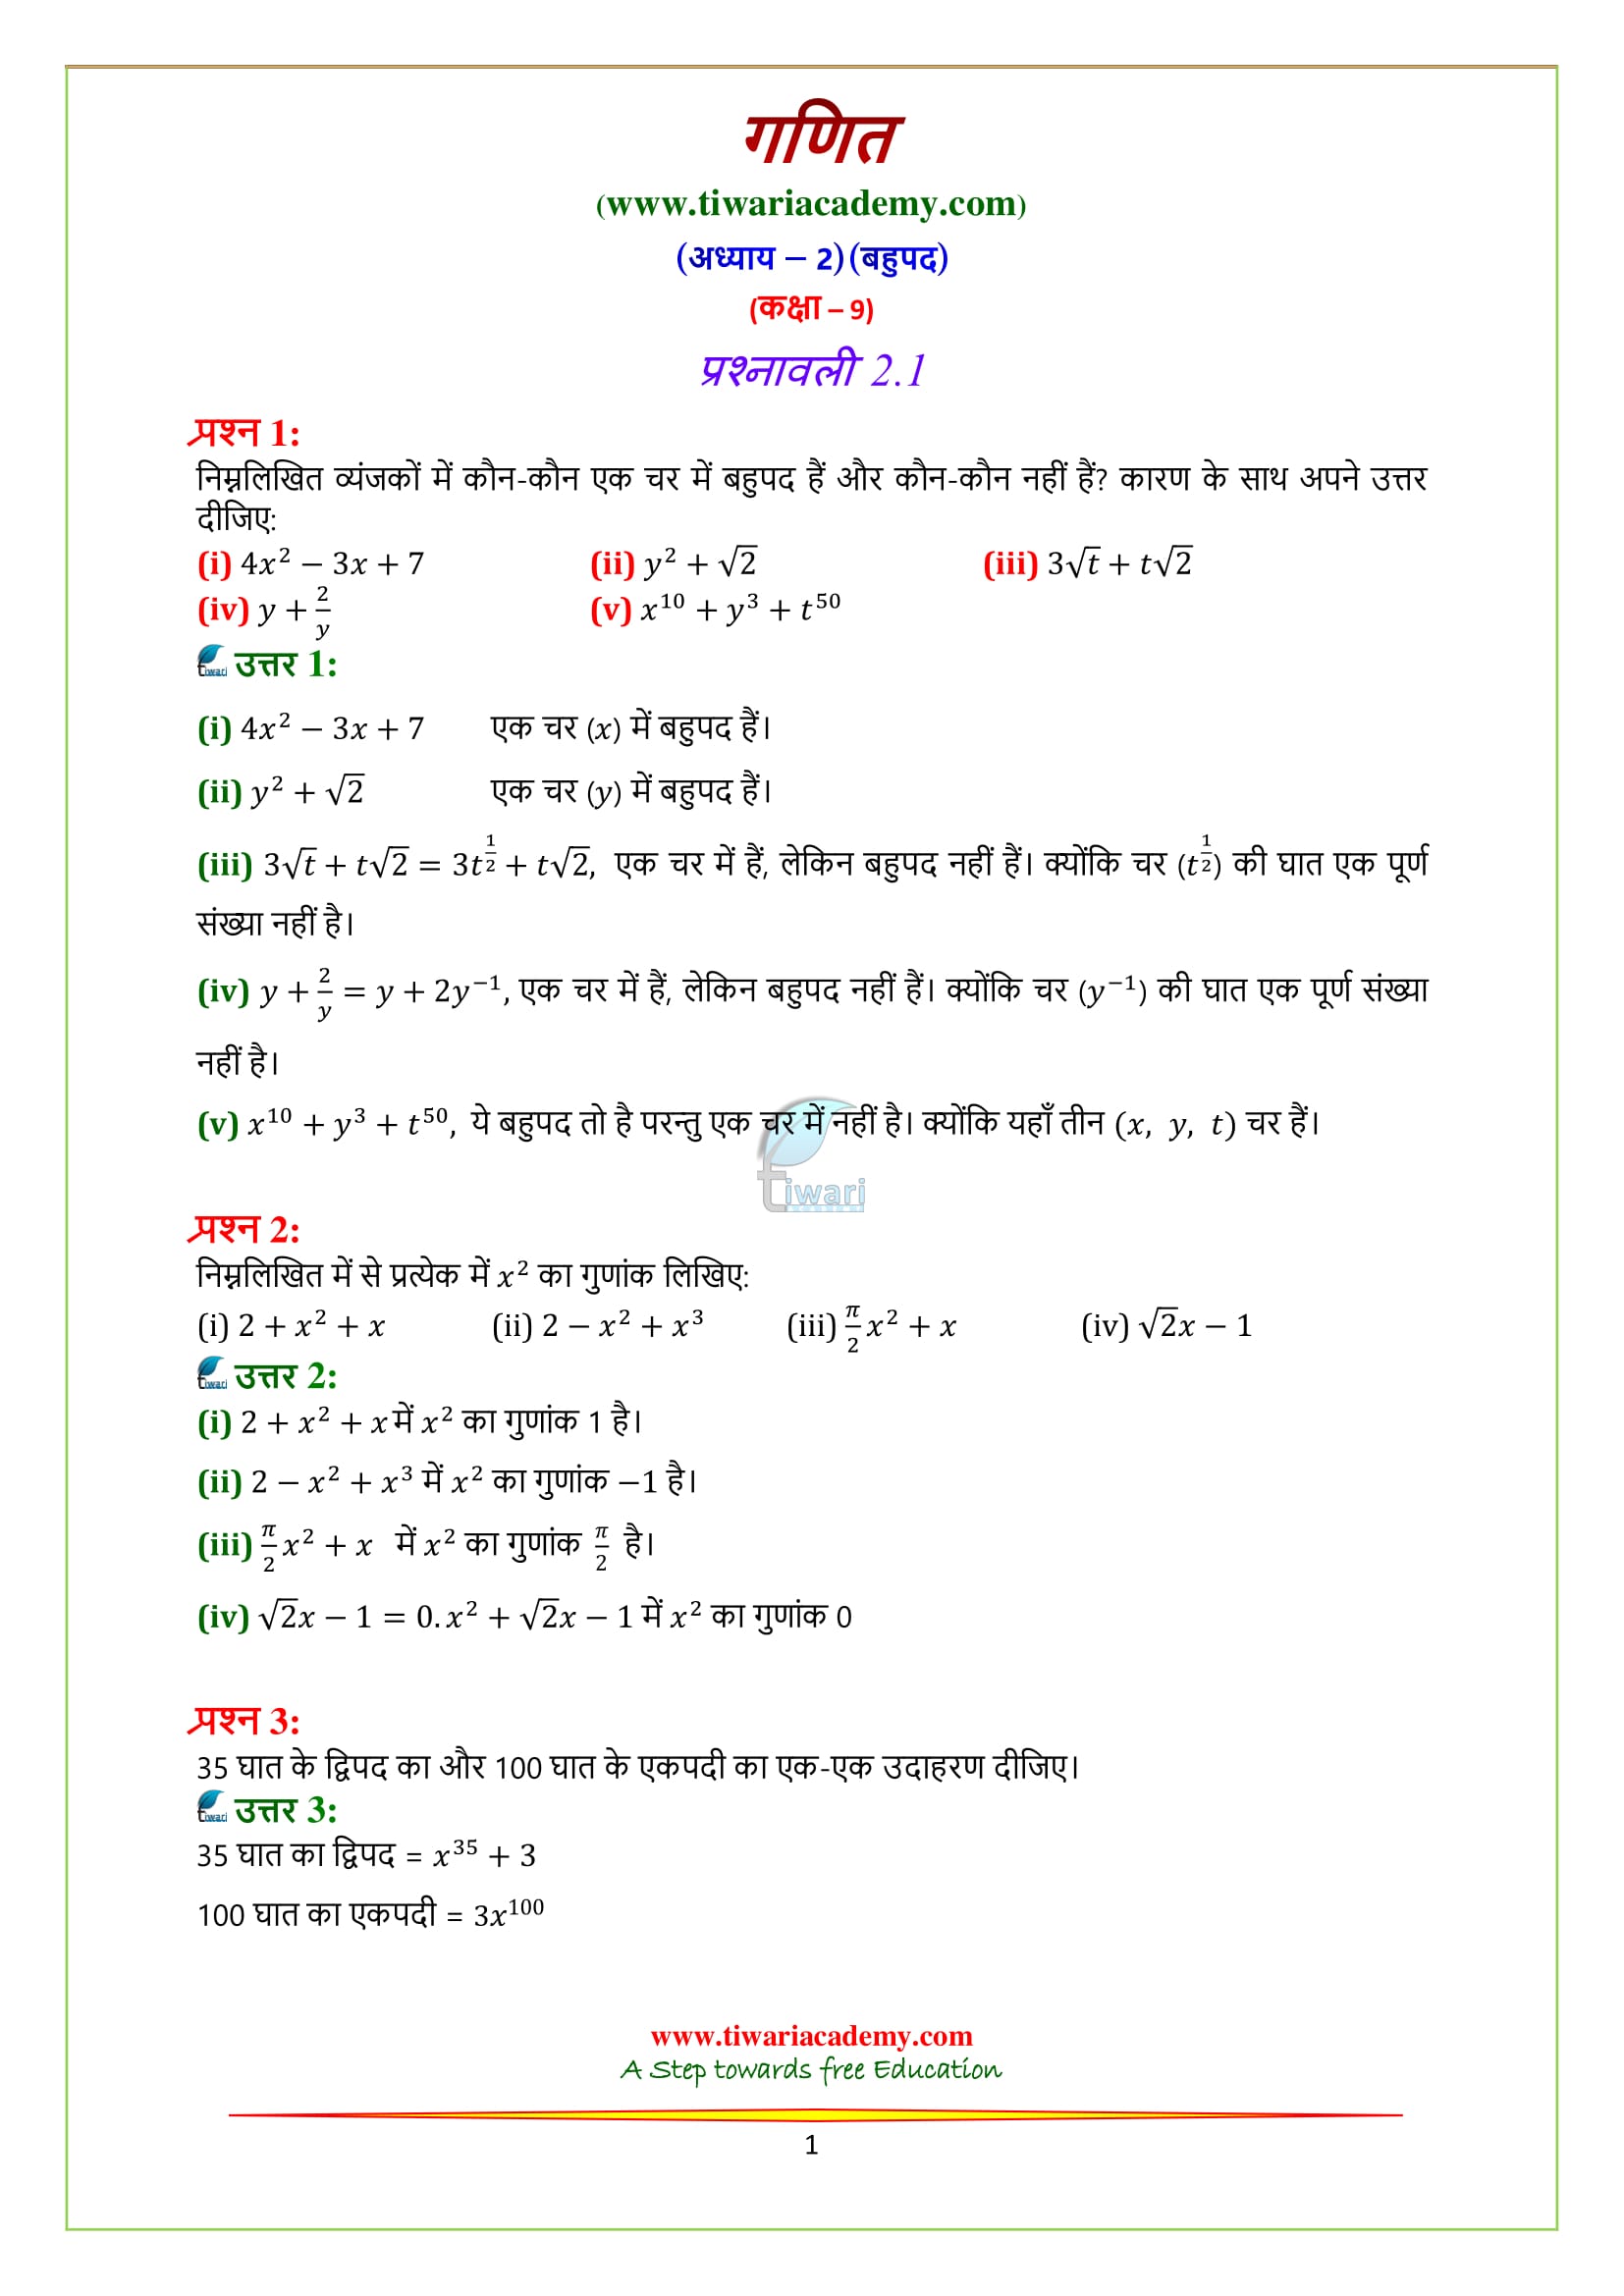 NCERT Solutions for Class 9 Maths Chapter 2 Exercise 2.1 Polynomials Hindi MEdium